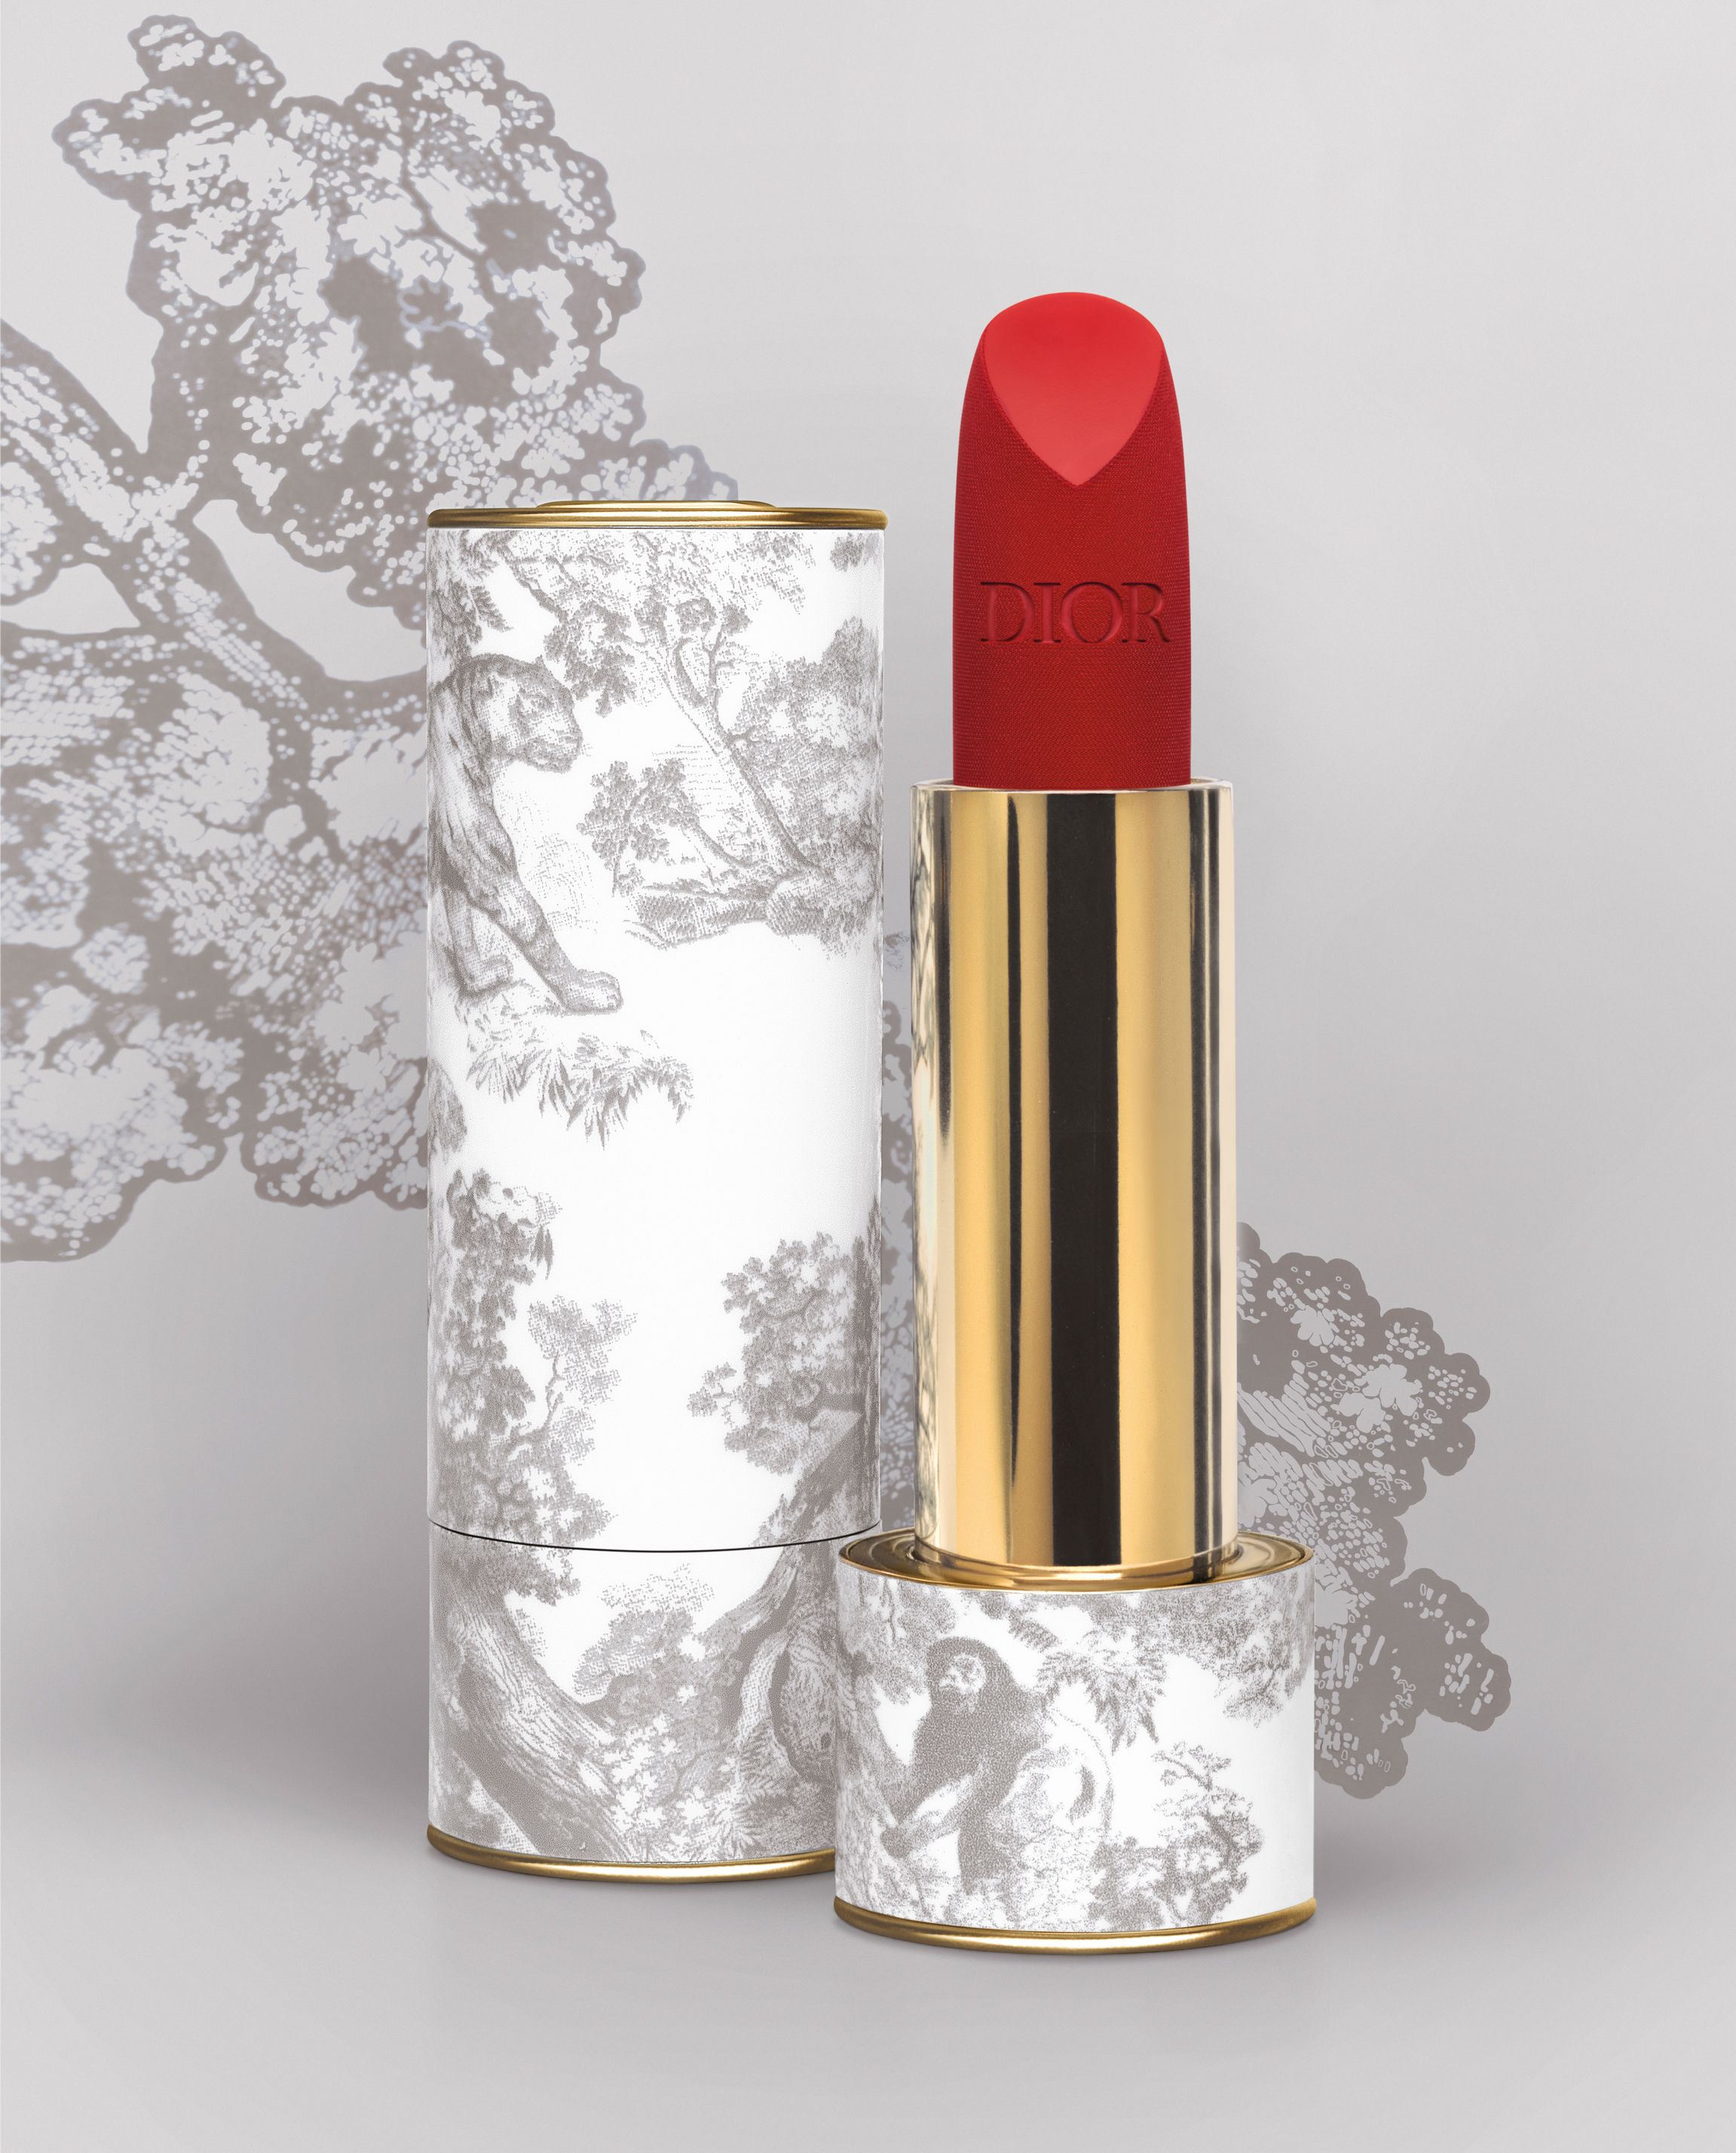 Introducing Dior's Couture Lipstick